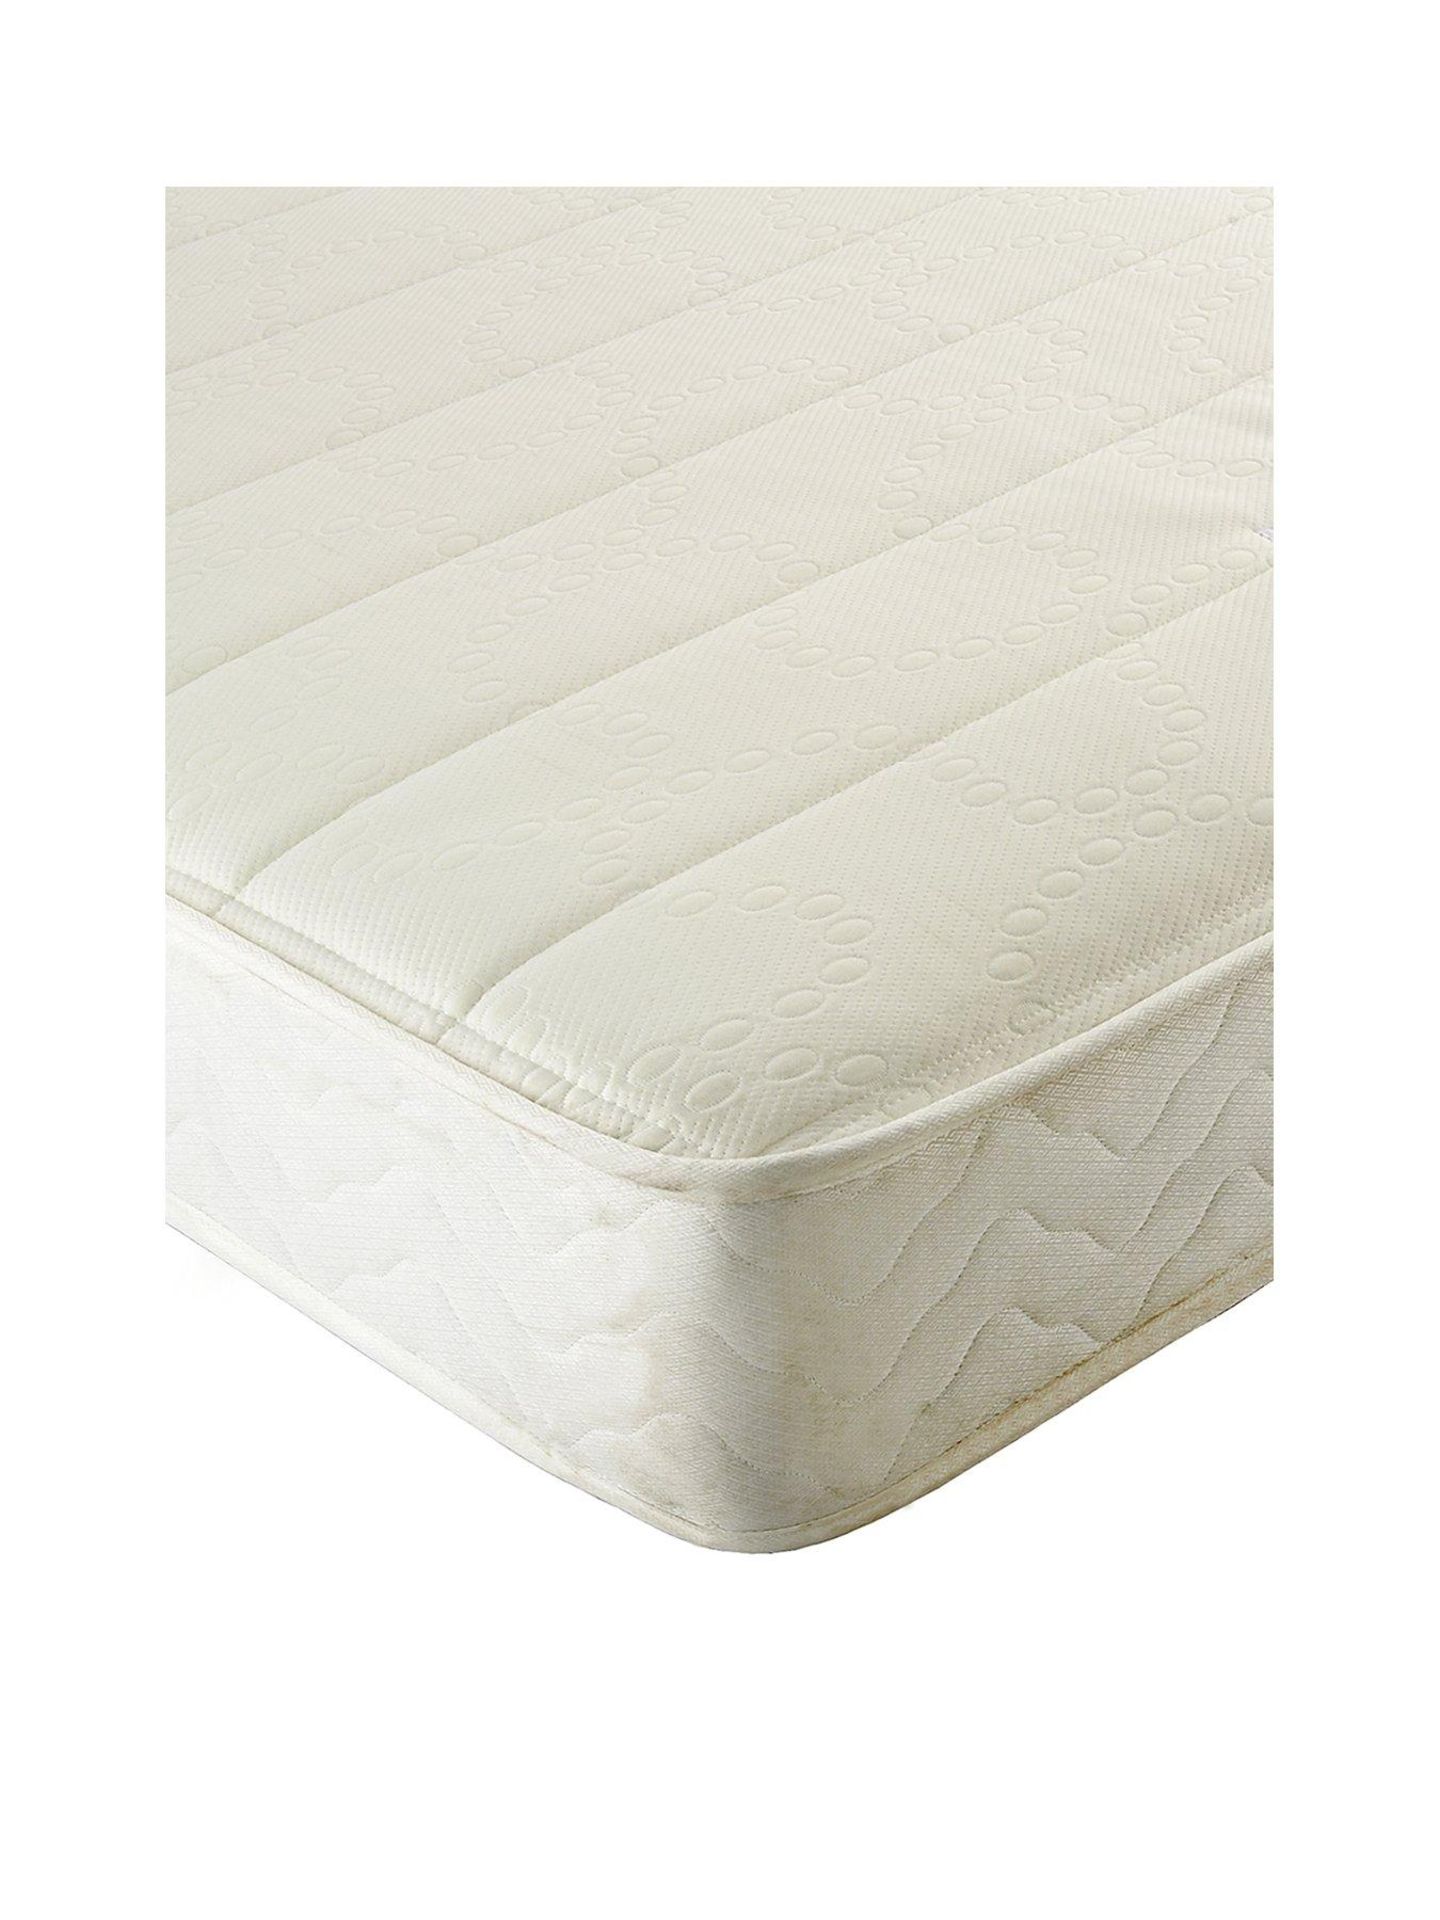 Boxed Item Woburn Super King Scroll Bed [Silver] And Mattress Set Rrp:¬£1318 - Image 3 of 3